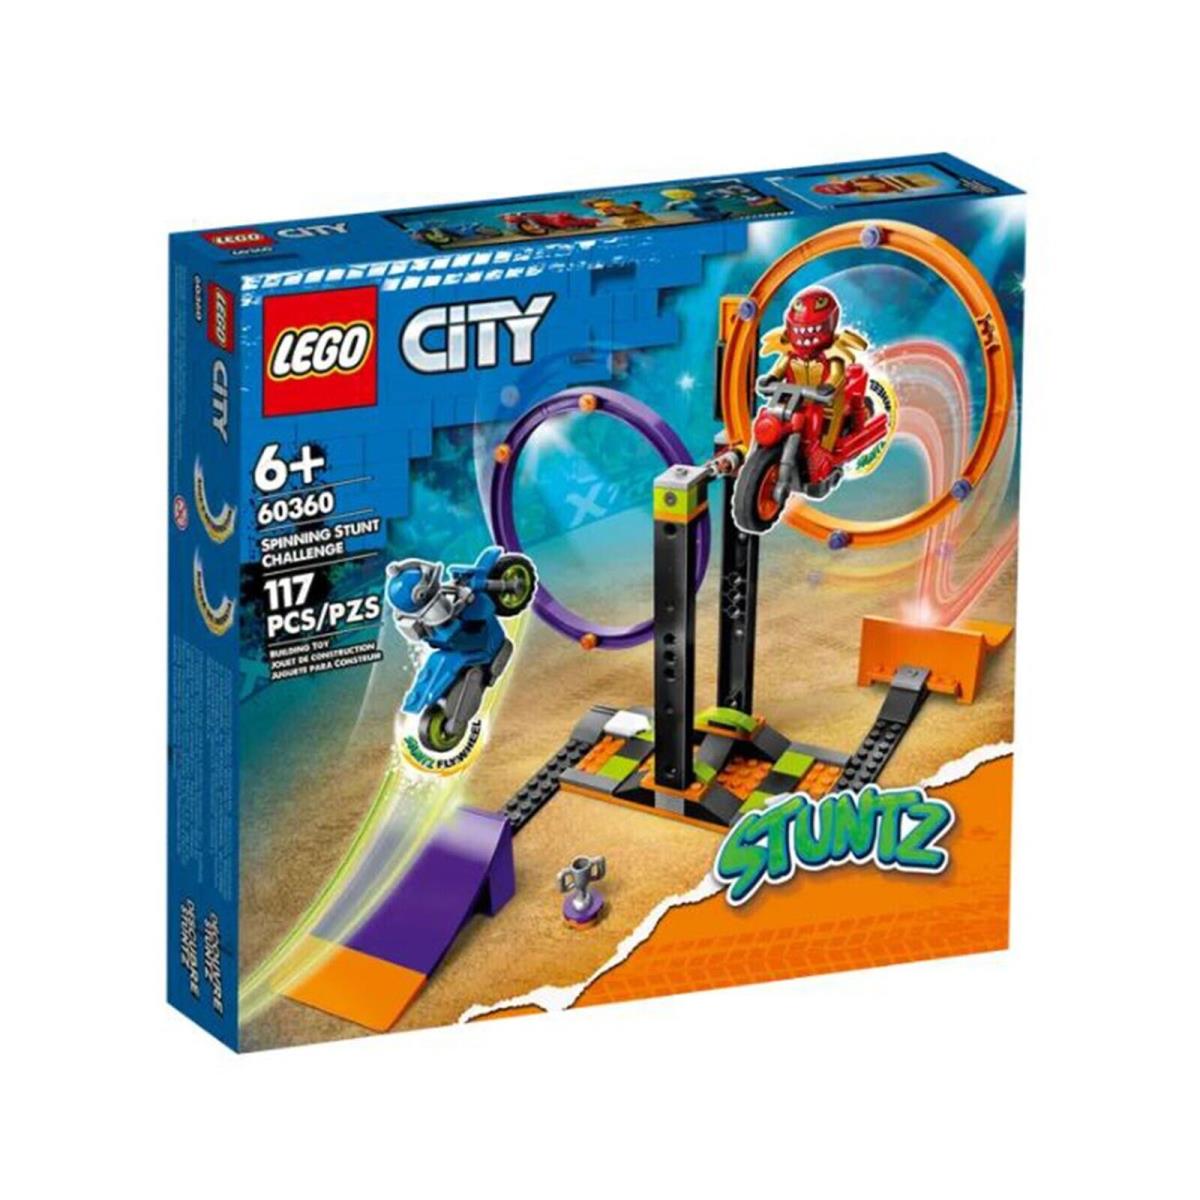 Lego City Spinning Stunt Challenge Building Set 60360 IN Stock